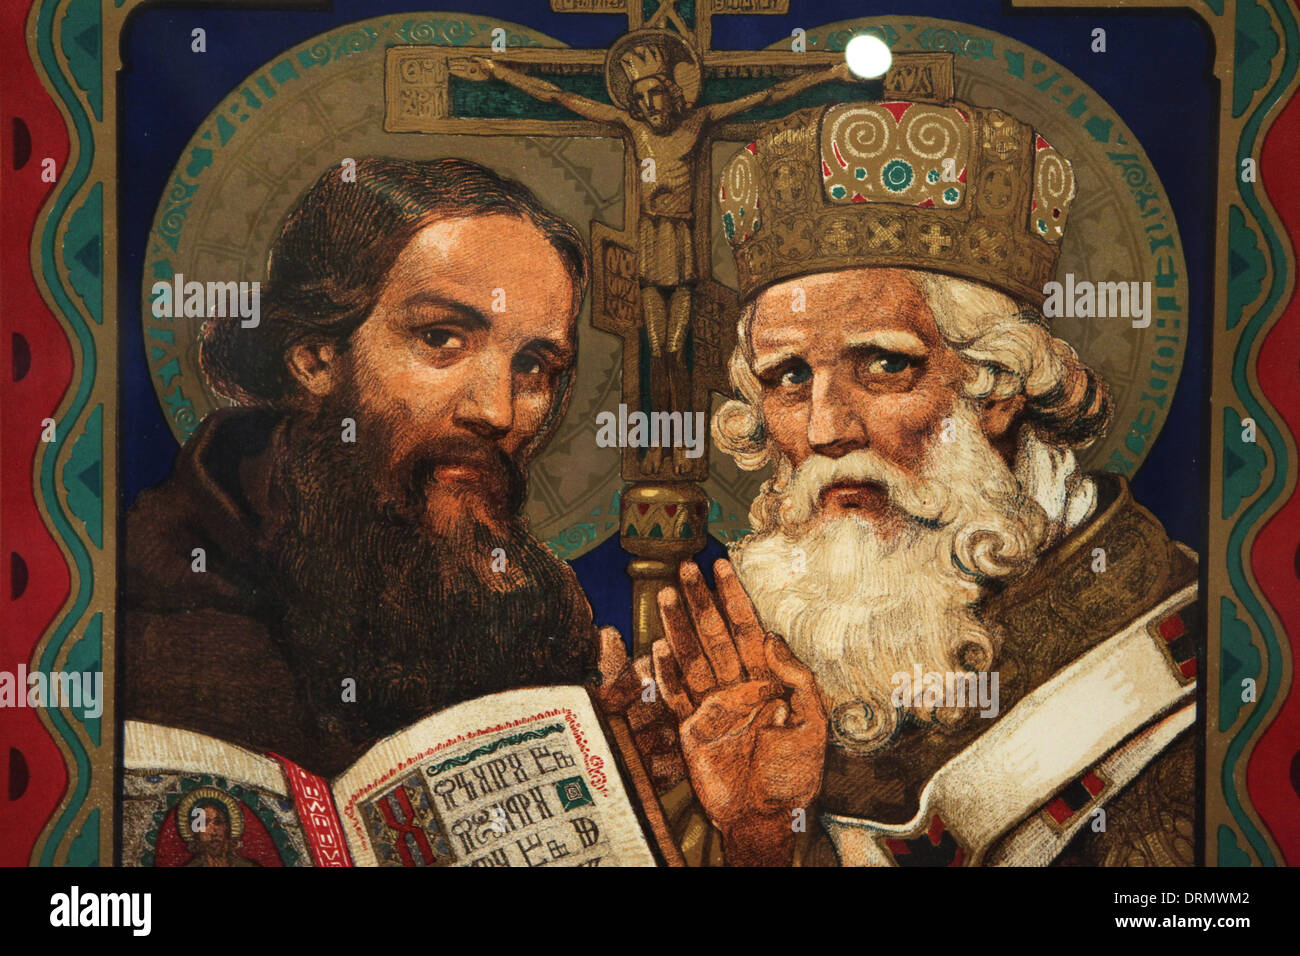 Coloured lithograph 'Saints Cyril and Methodius' (1912) by Jano Kohler at the exhibition 'Saints Cyril and Methodius' in Prague. Stock Photo